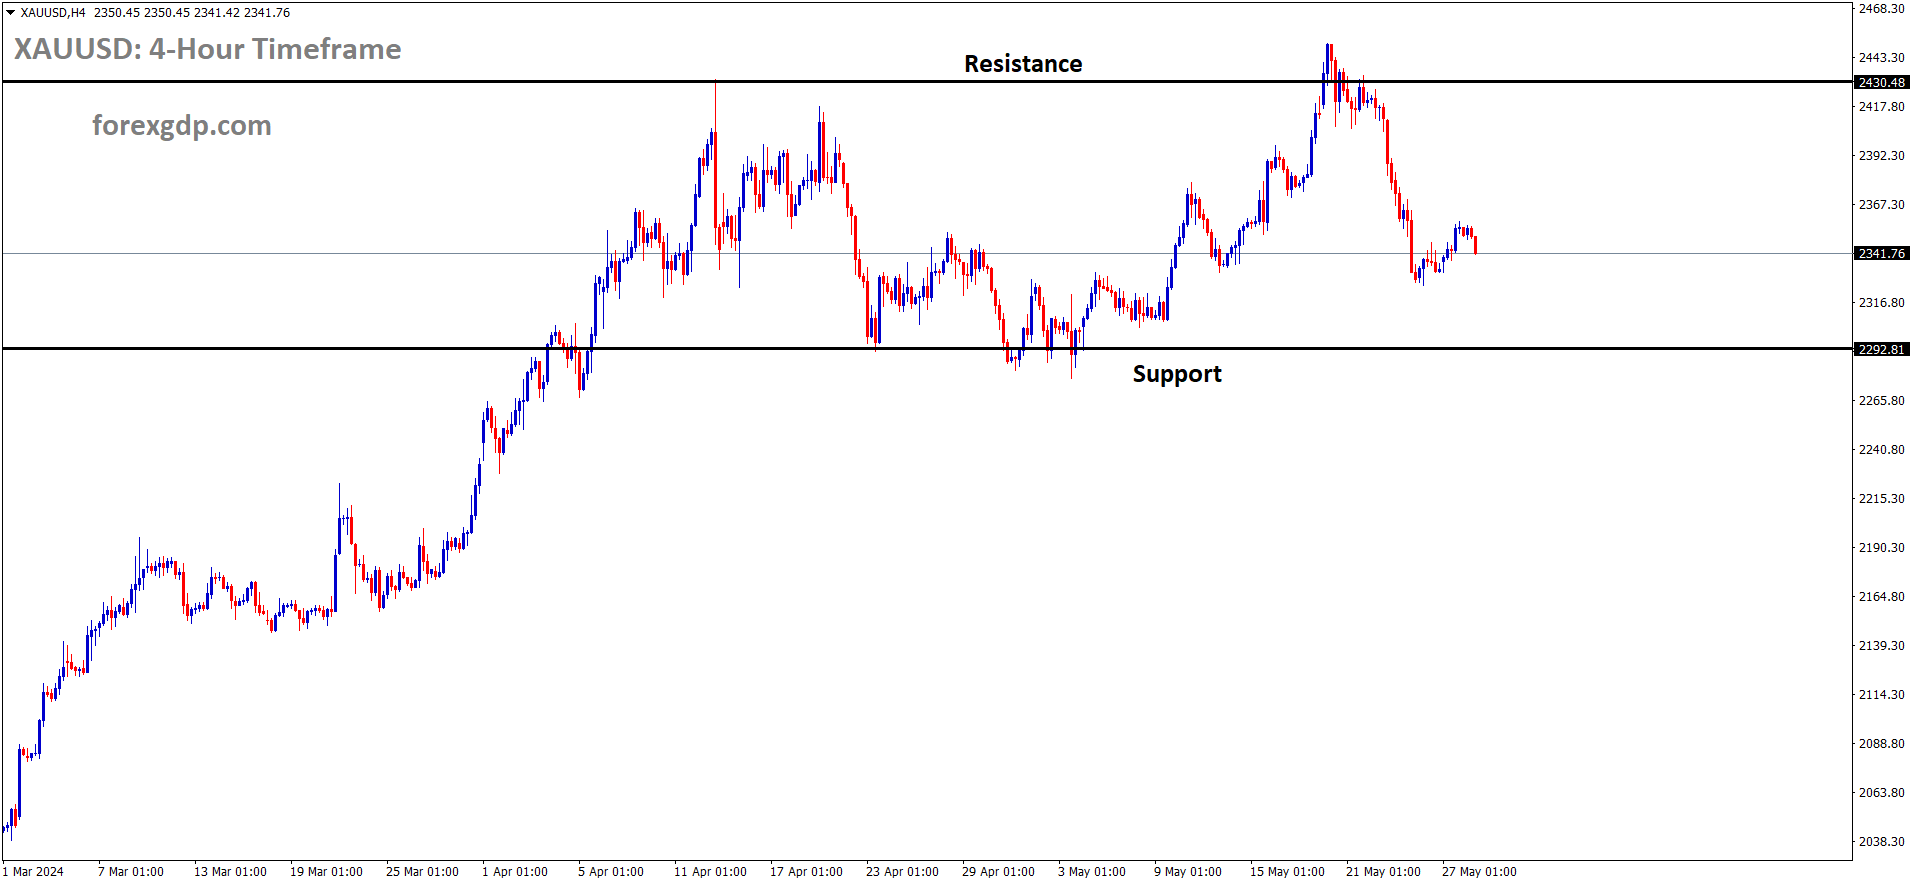 XAUUSD is moving in the Box pattern and the market has fallen from the resistance area of the pattern